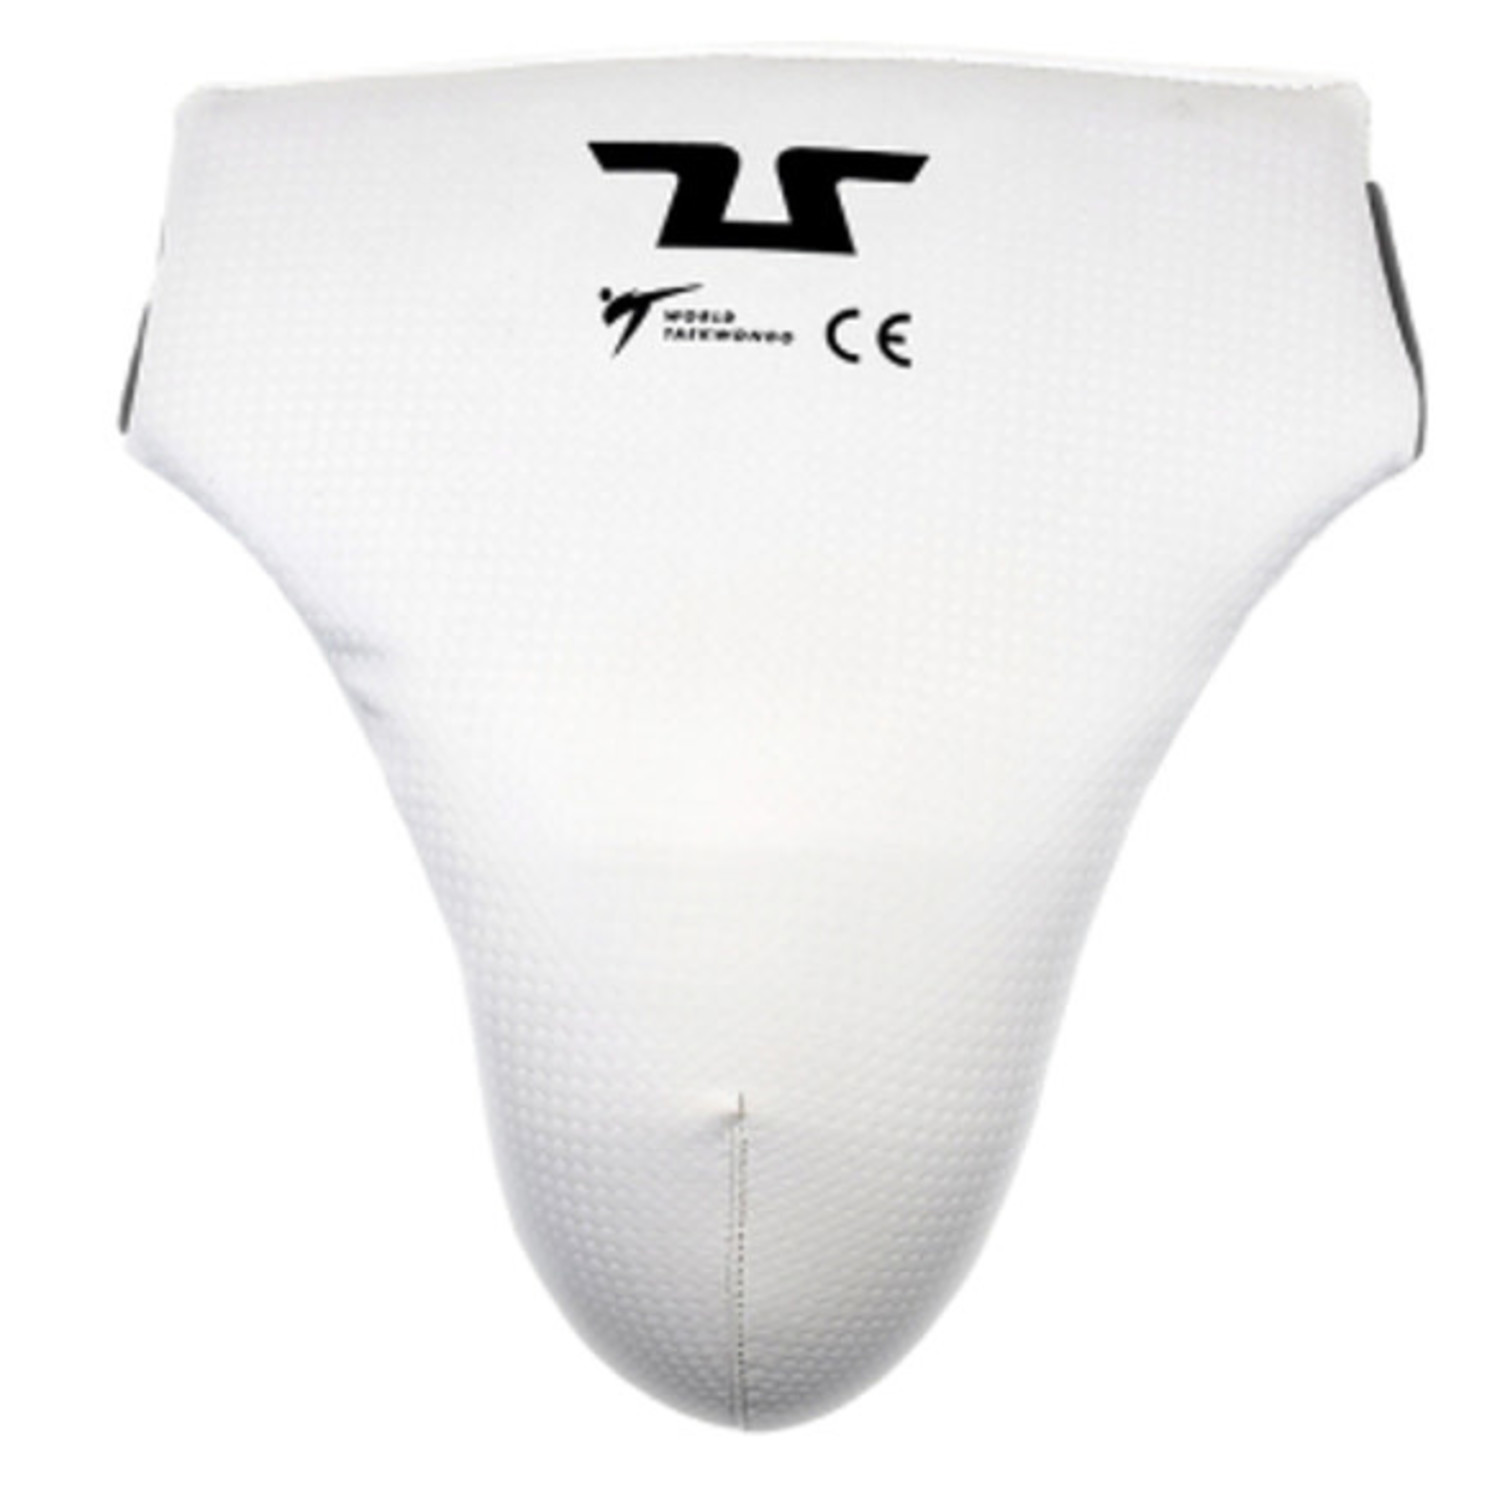 Select Groin Guard, Lightweight & Comfortable For Sparring